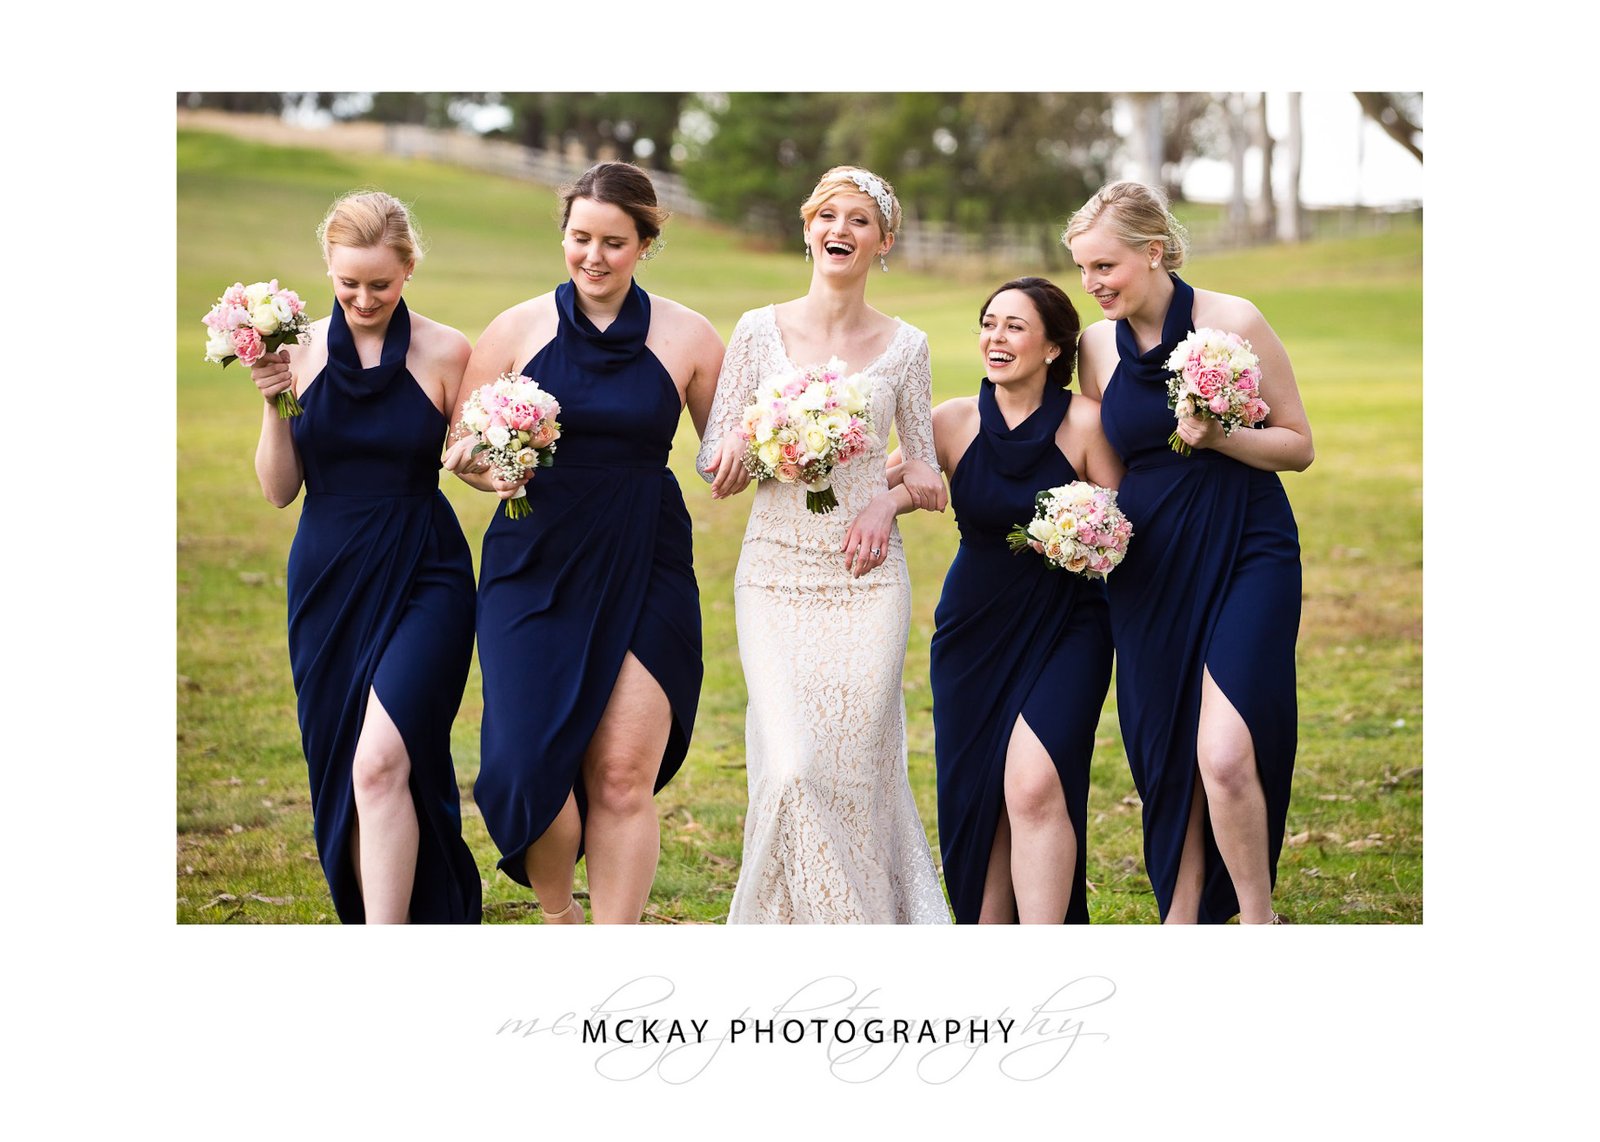 Lucy and bridesmaids photo on golf course